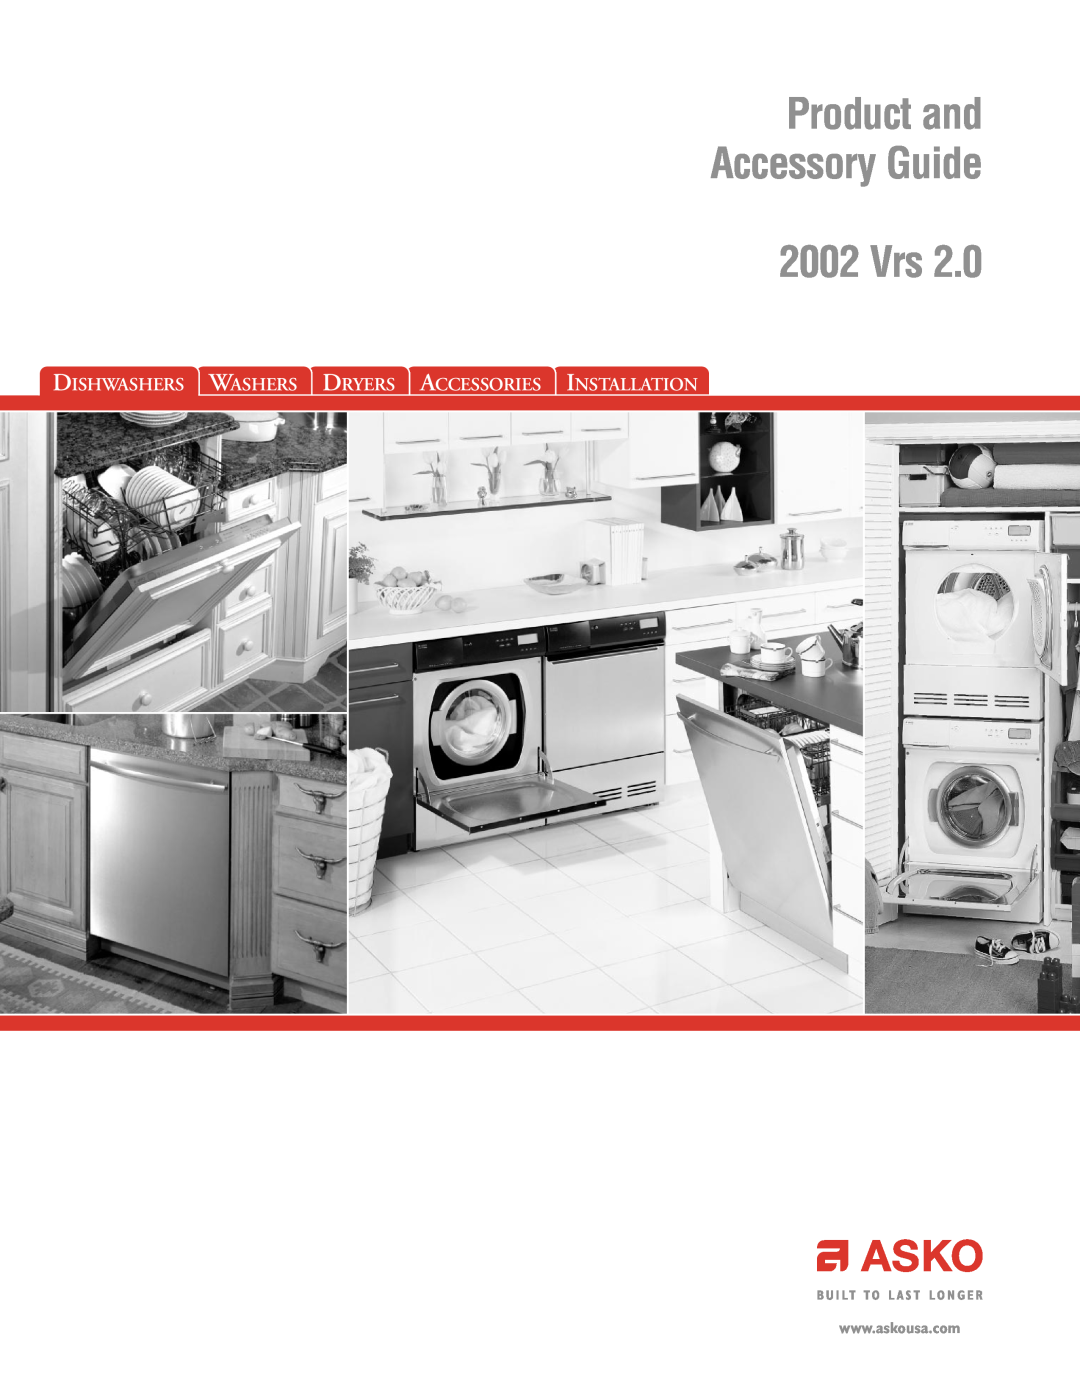 Fisher & Paykel 2002 VRS 2.0 manual Product and Accessory Guide 2002 Vrs, B U I Lt To L A S T L O N G E R 